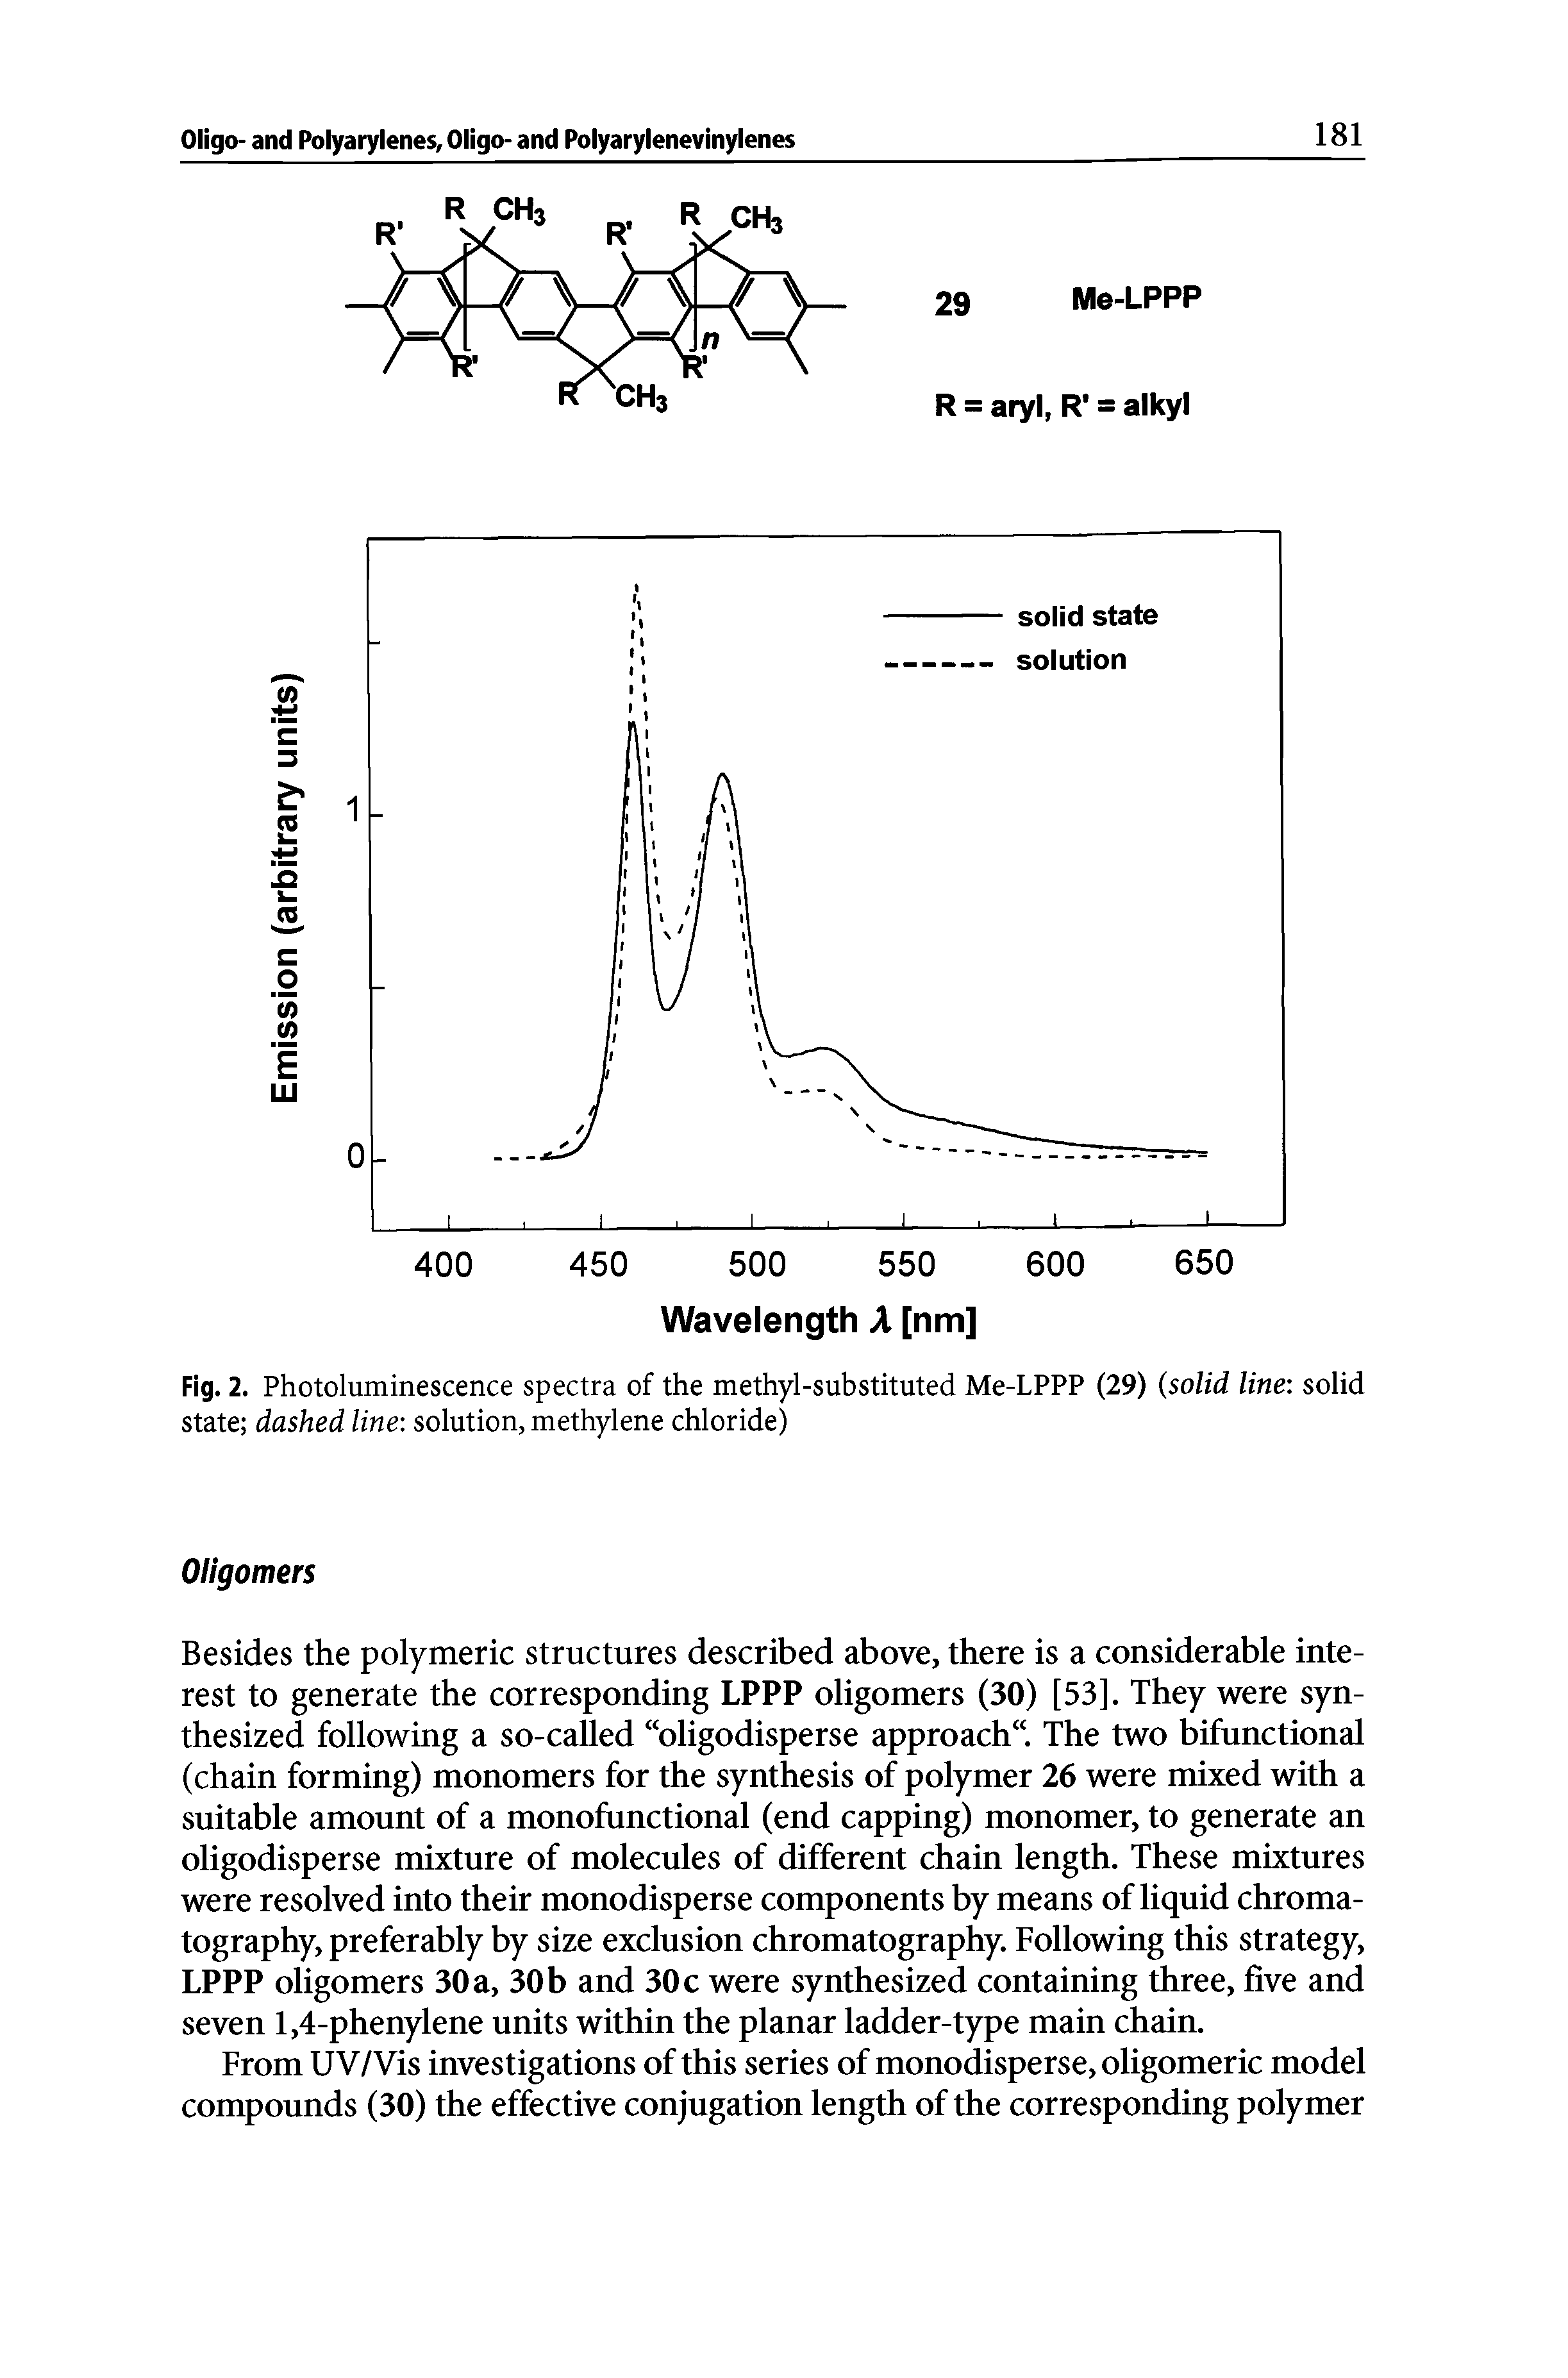 Fig. 2. Photoluminescence spectra of the methyl-substituted Me-LPPP (29) (solid line solid state dashed line solution, methylene chloride)...